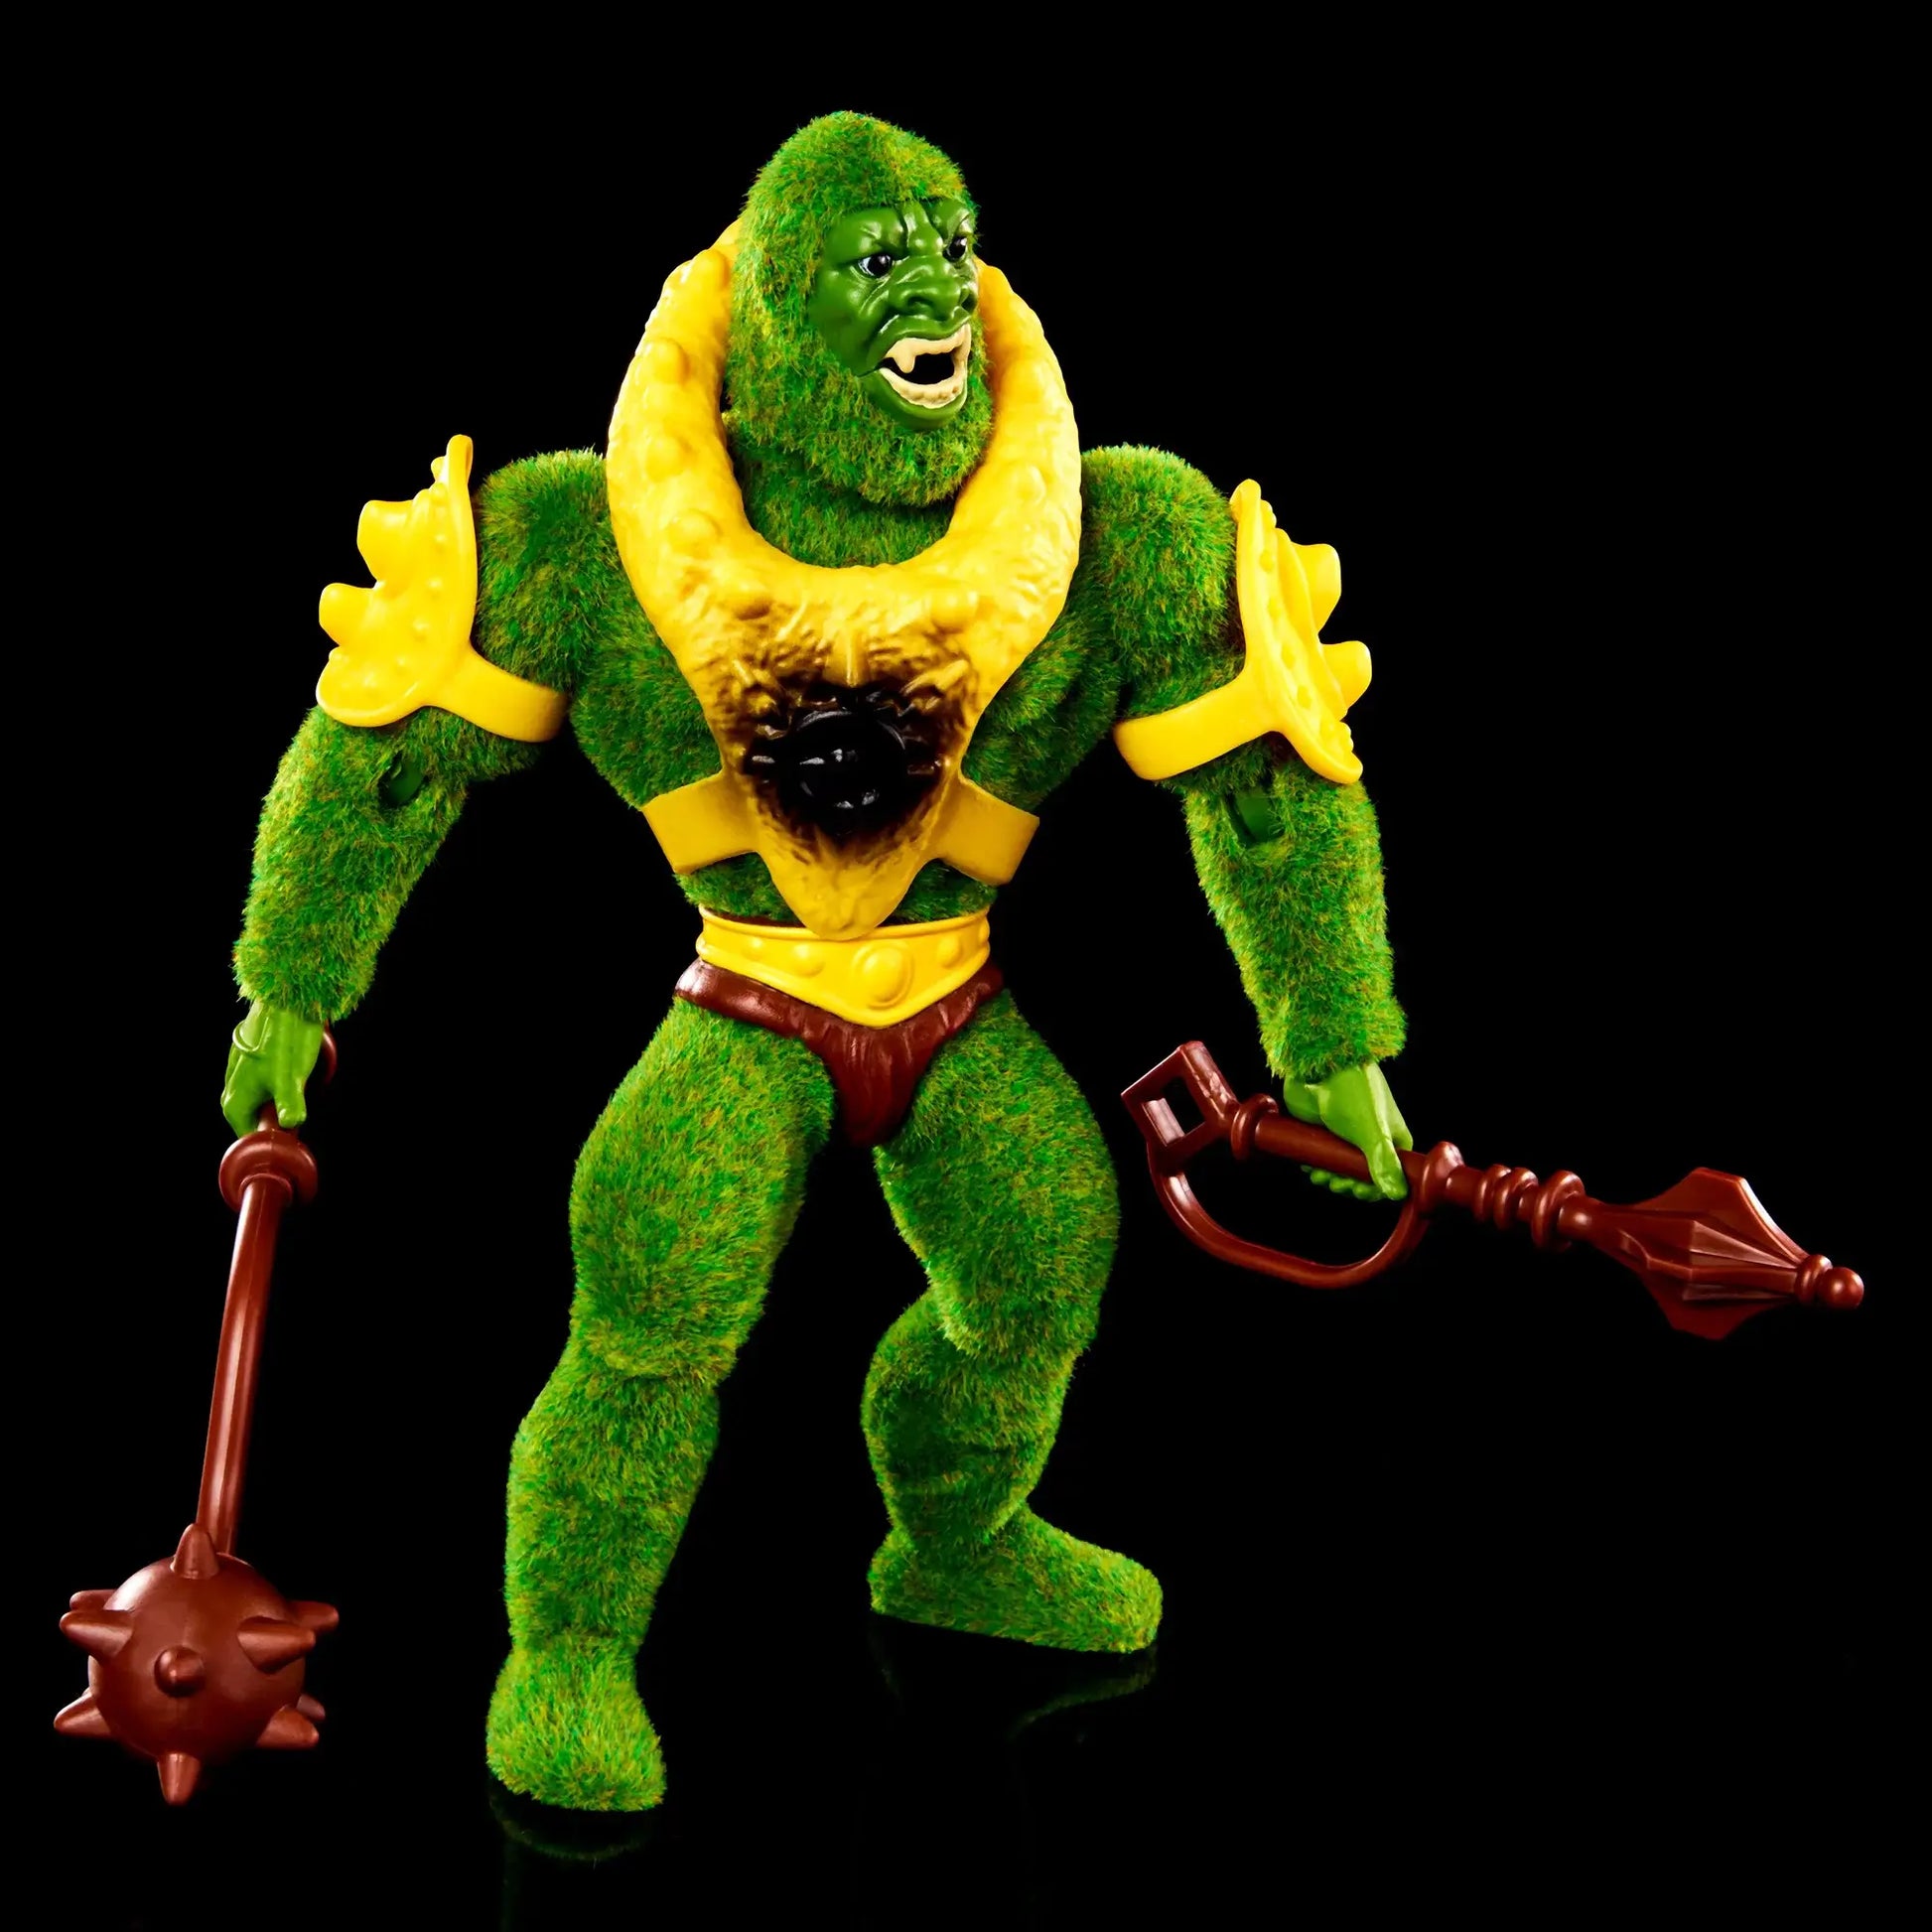 masters of the universe origins flocked moss man walmart exclusive in armor holding flail and sceptor